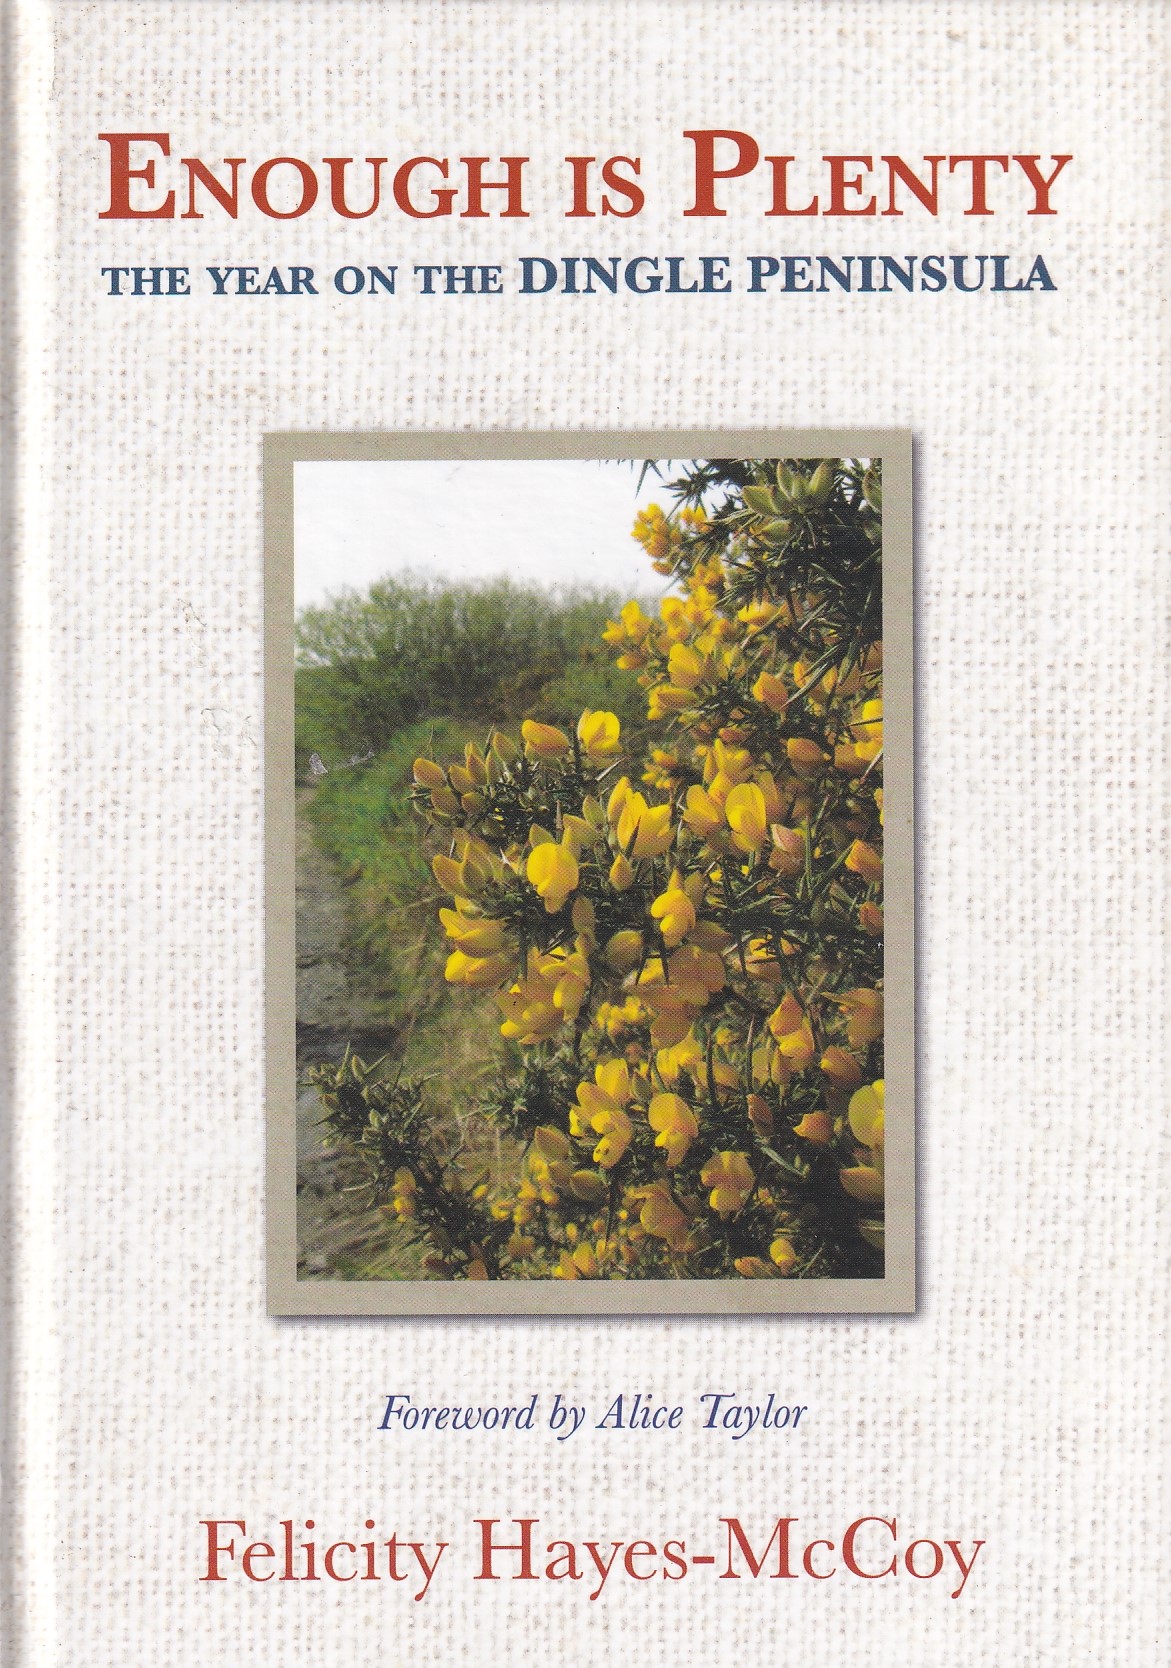 Enough is Plenty – The Year on the Dingle Peninsula (Signed) | Hayes-McCoy, Felicity | Charlie Byrne's